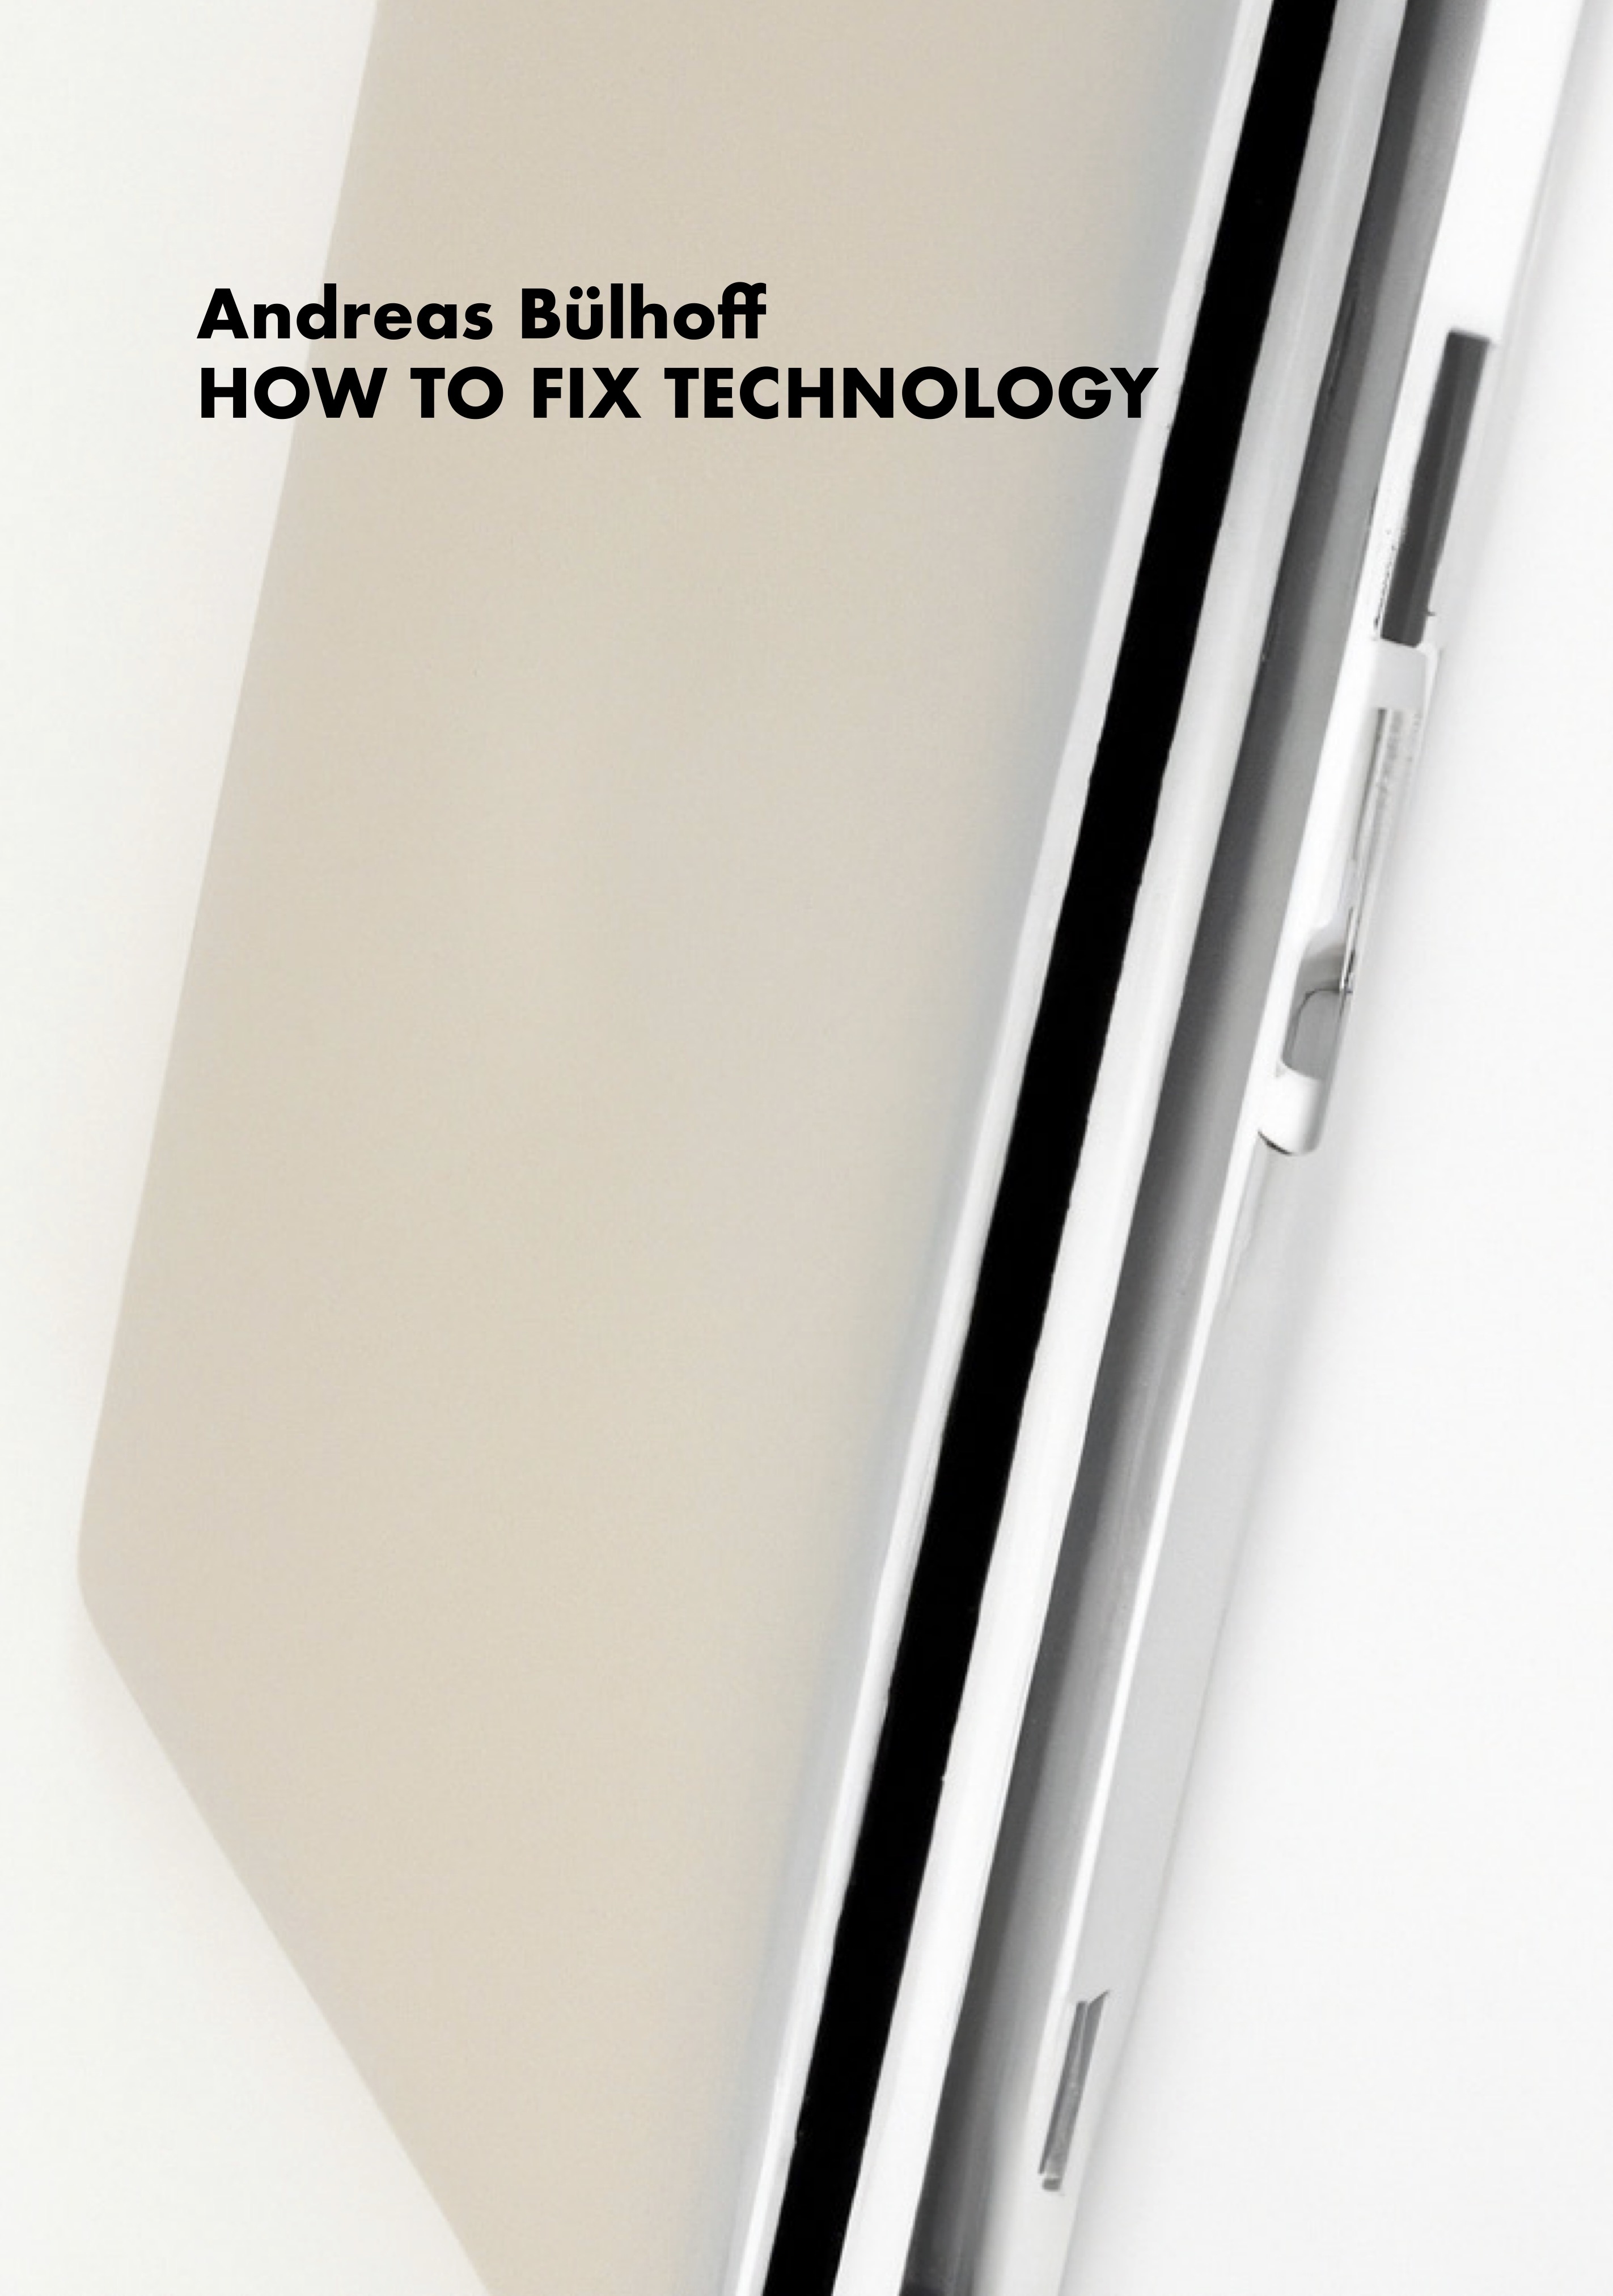 How to Fix Technology